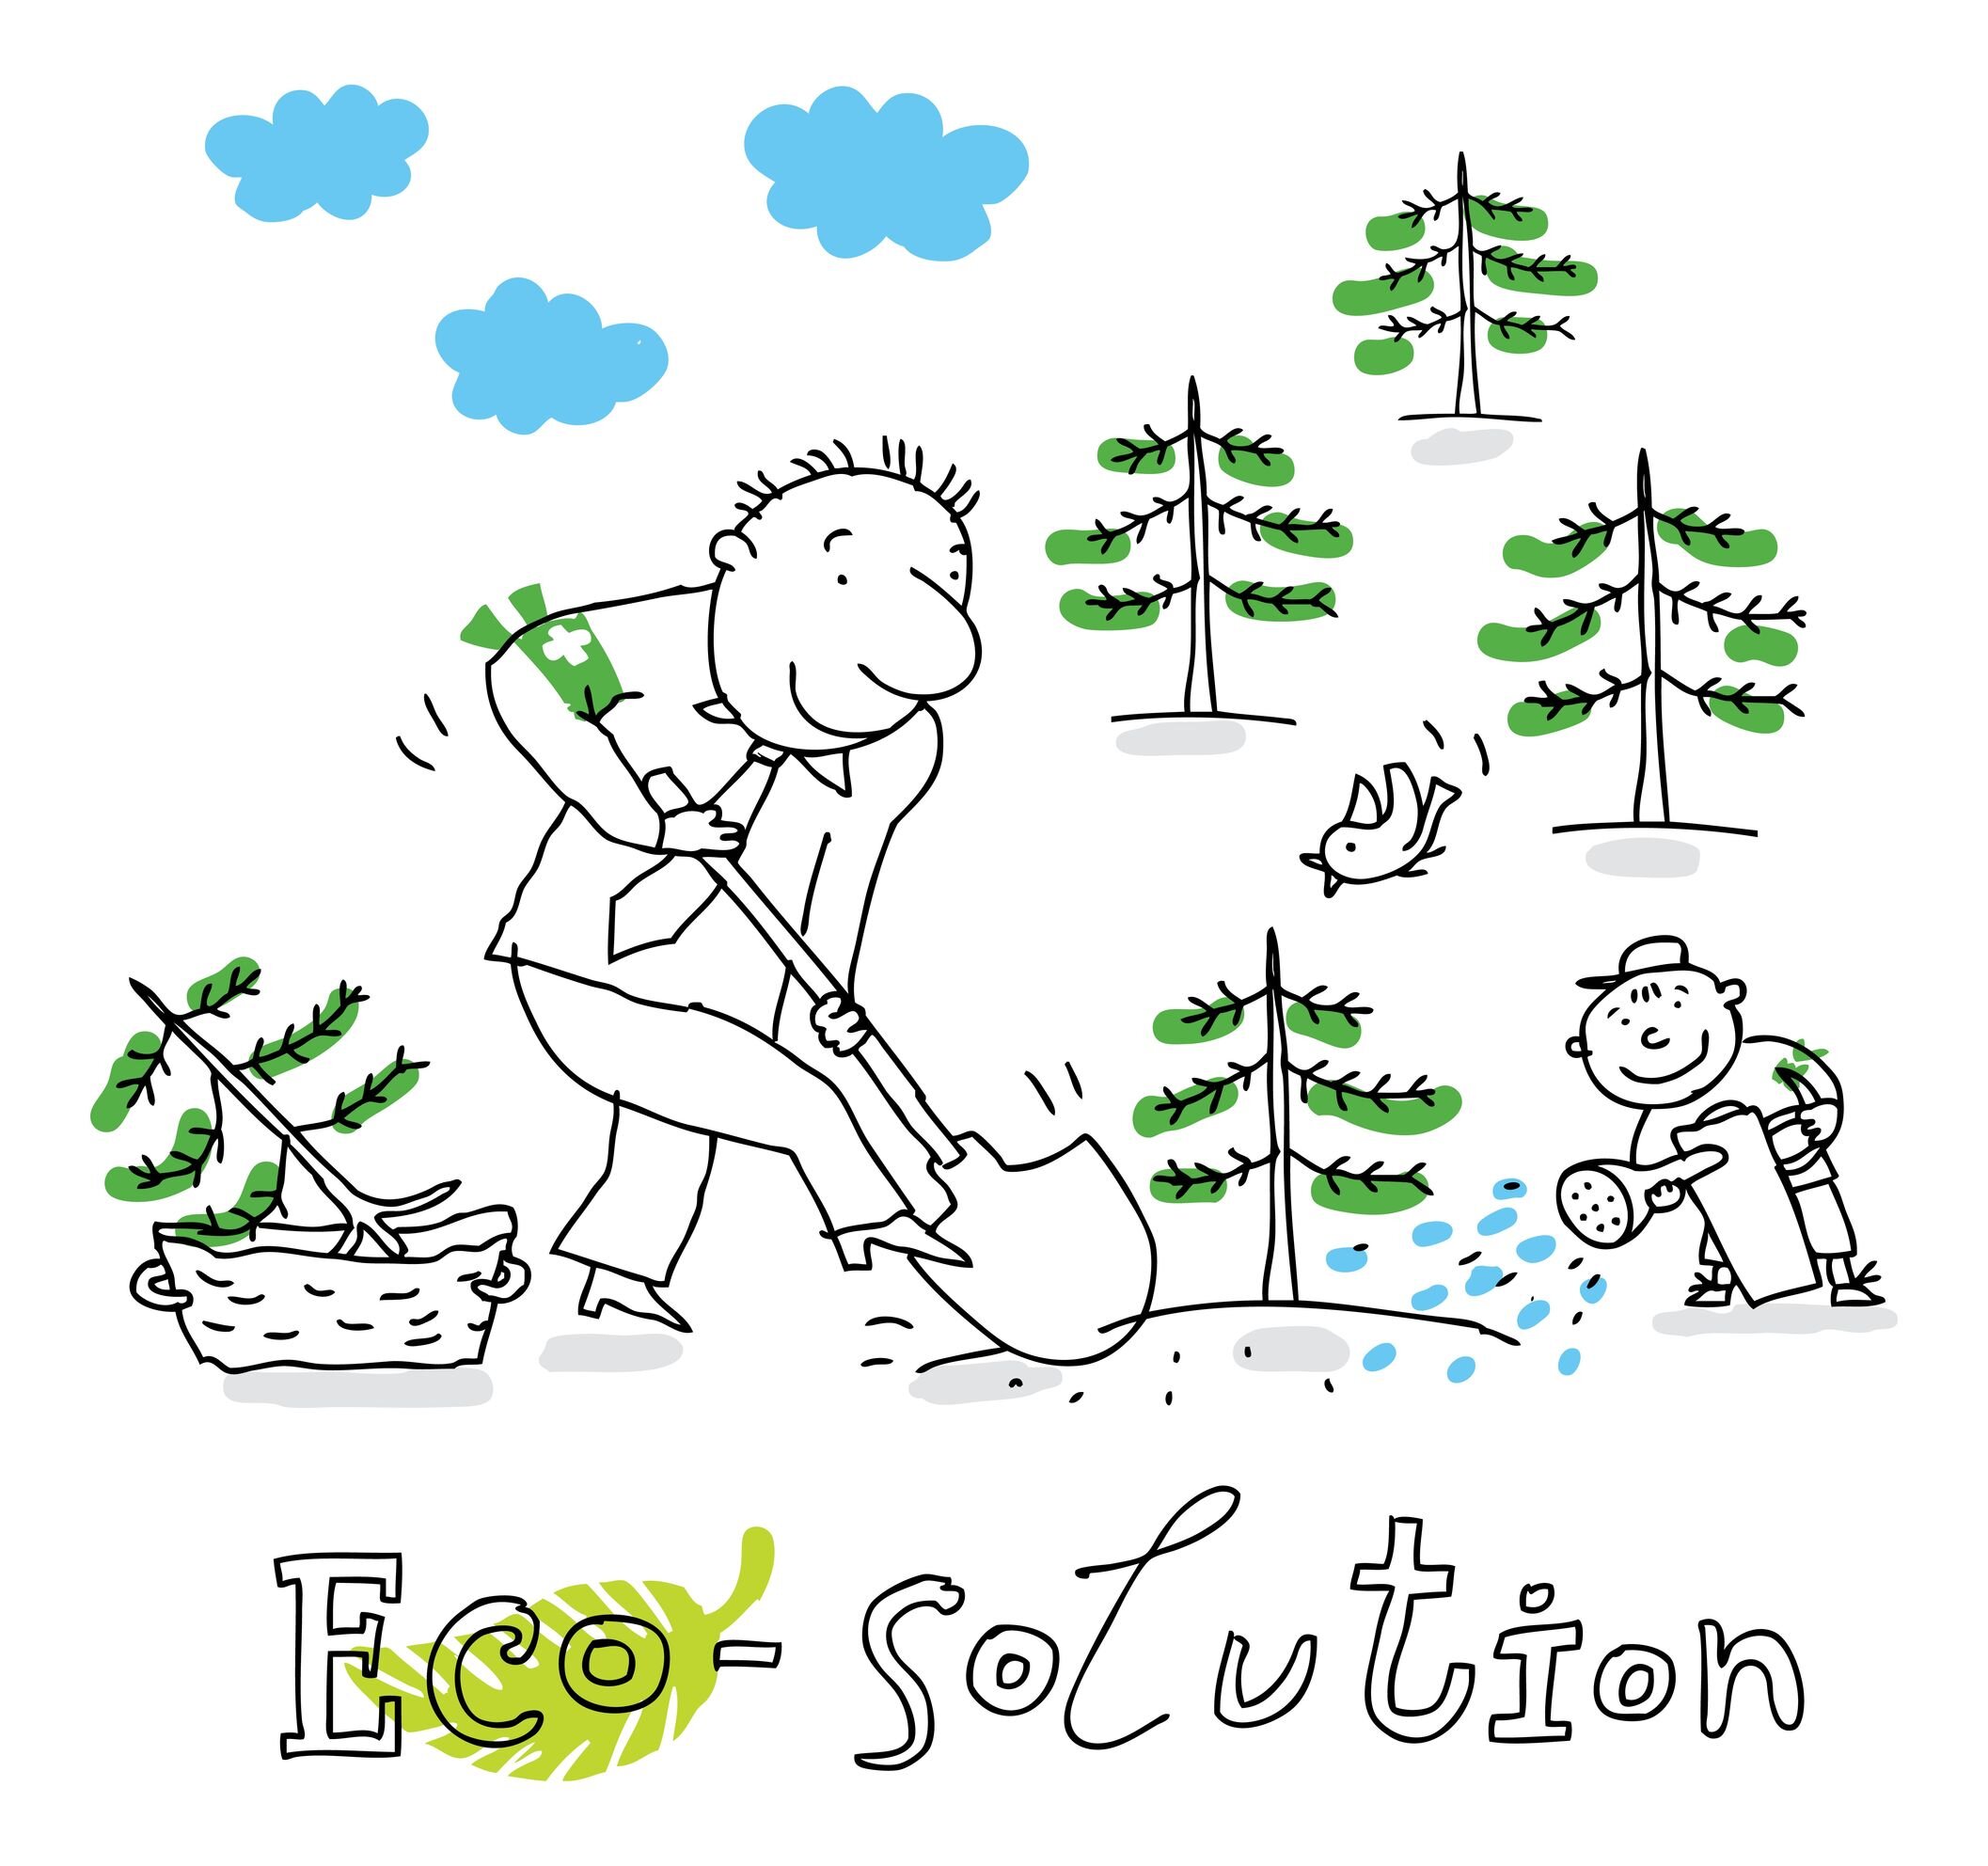  12380800 - eco solution; ecology and environment protection, vector drawing ; isolated on background. 